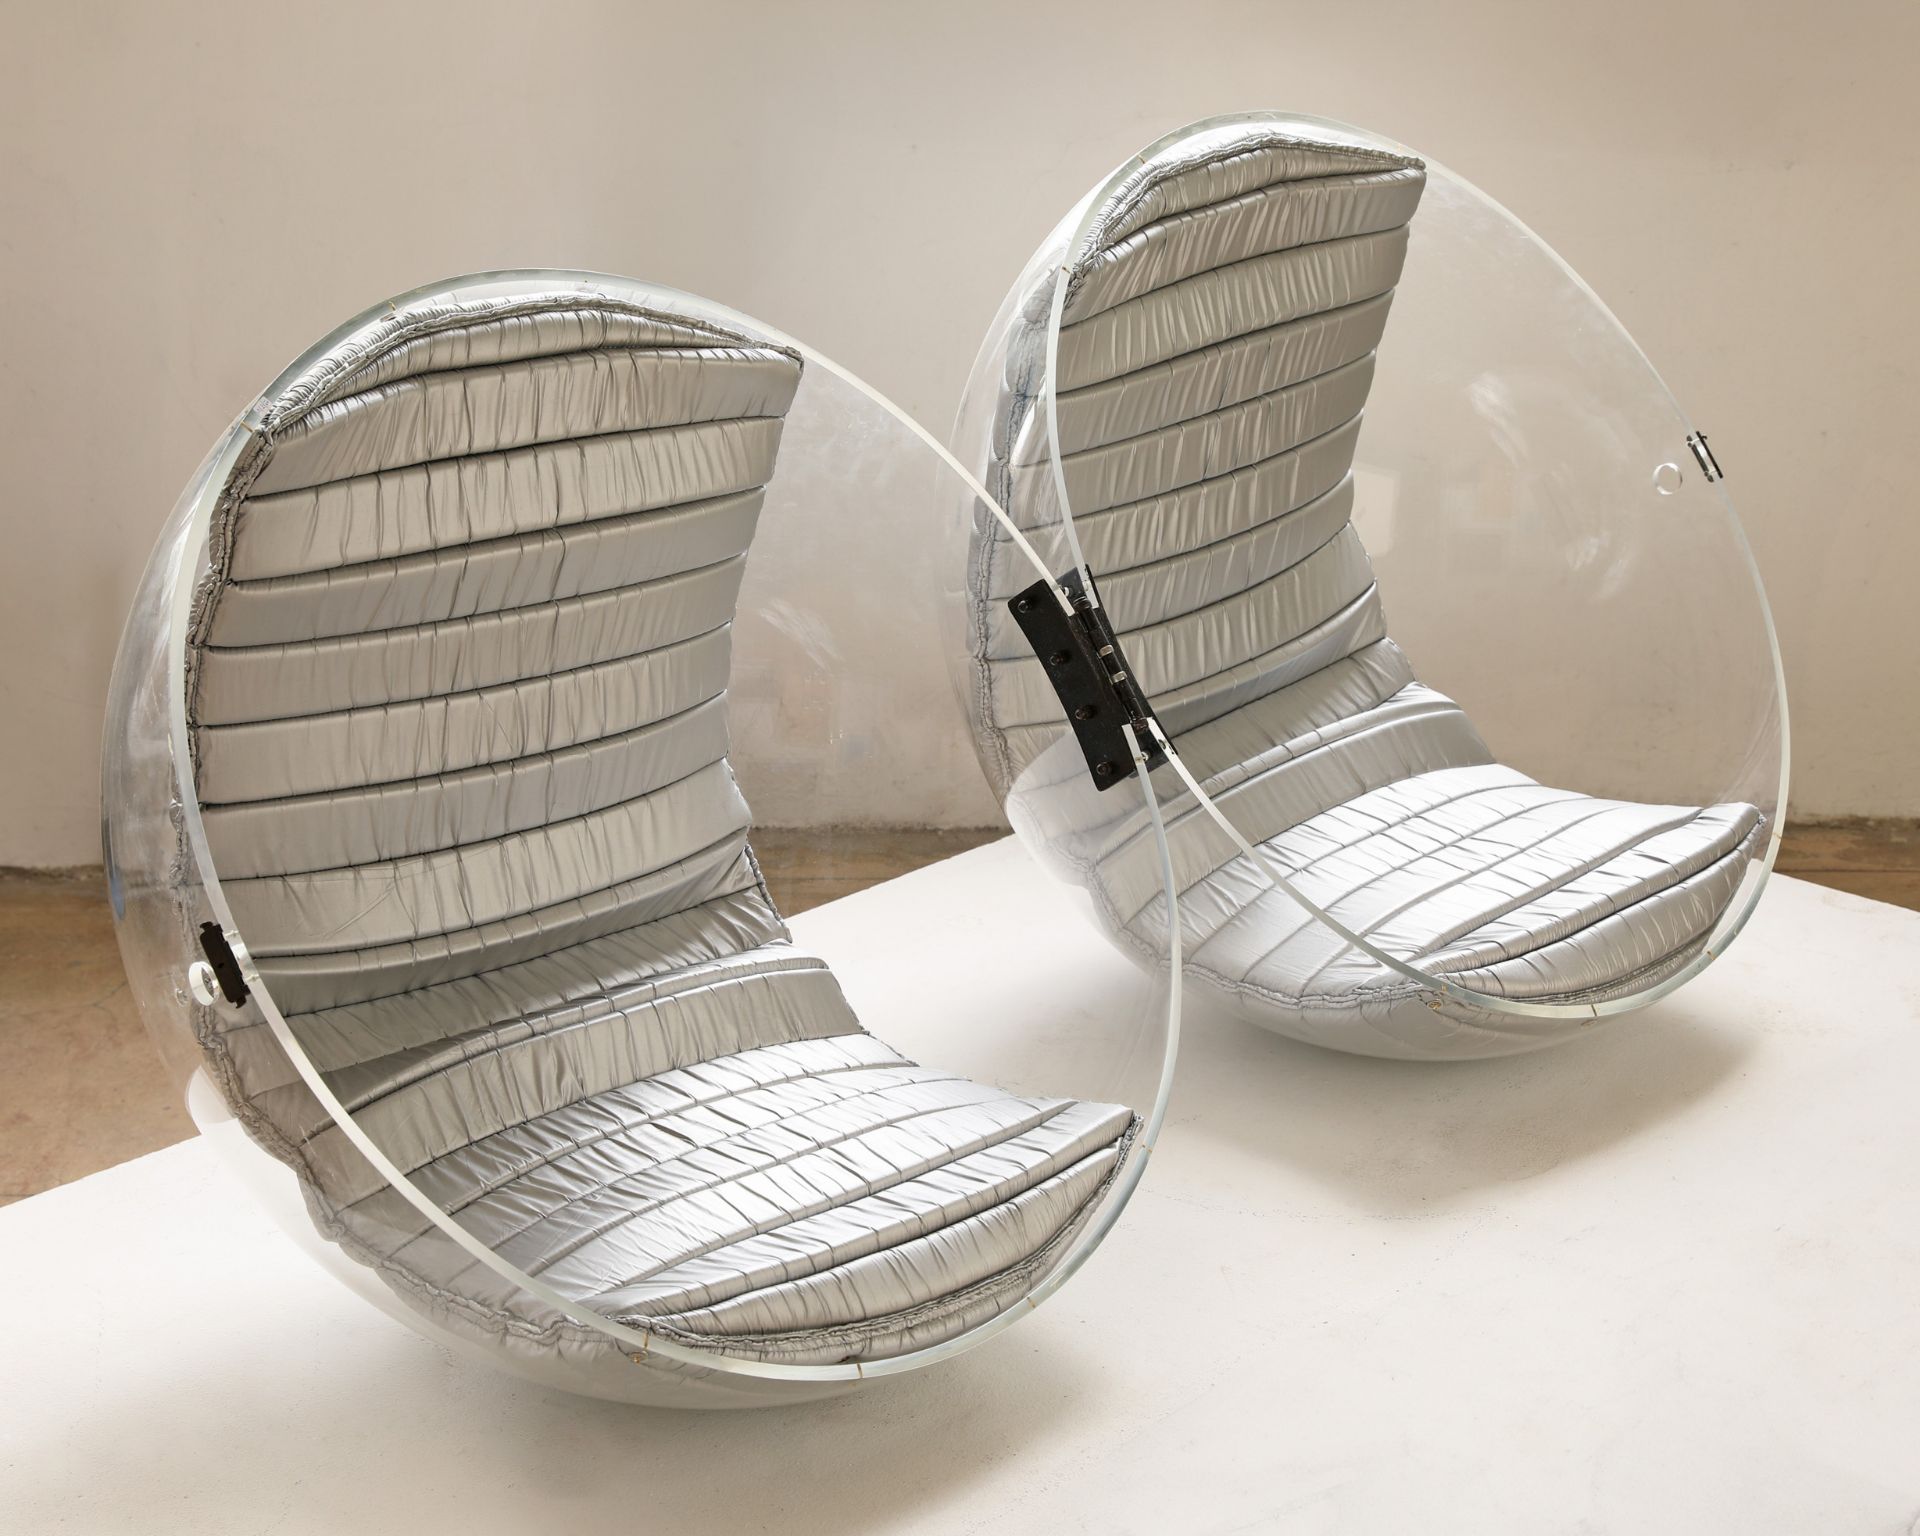 Danilo Silvestrin, Gunther Lambert, Rare seating object for two people / acrylic ball chair - Image 2 of 9